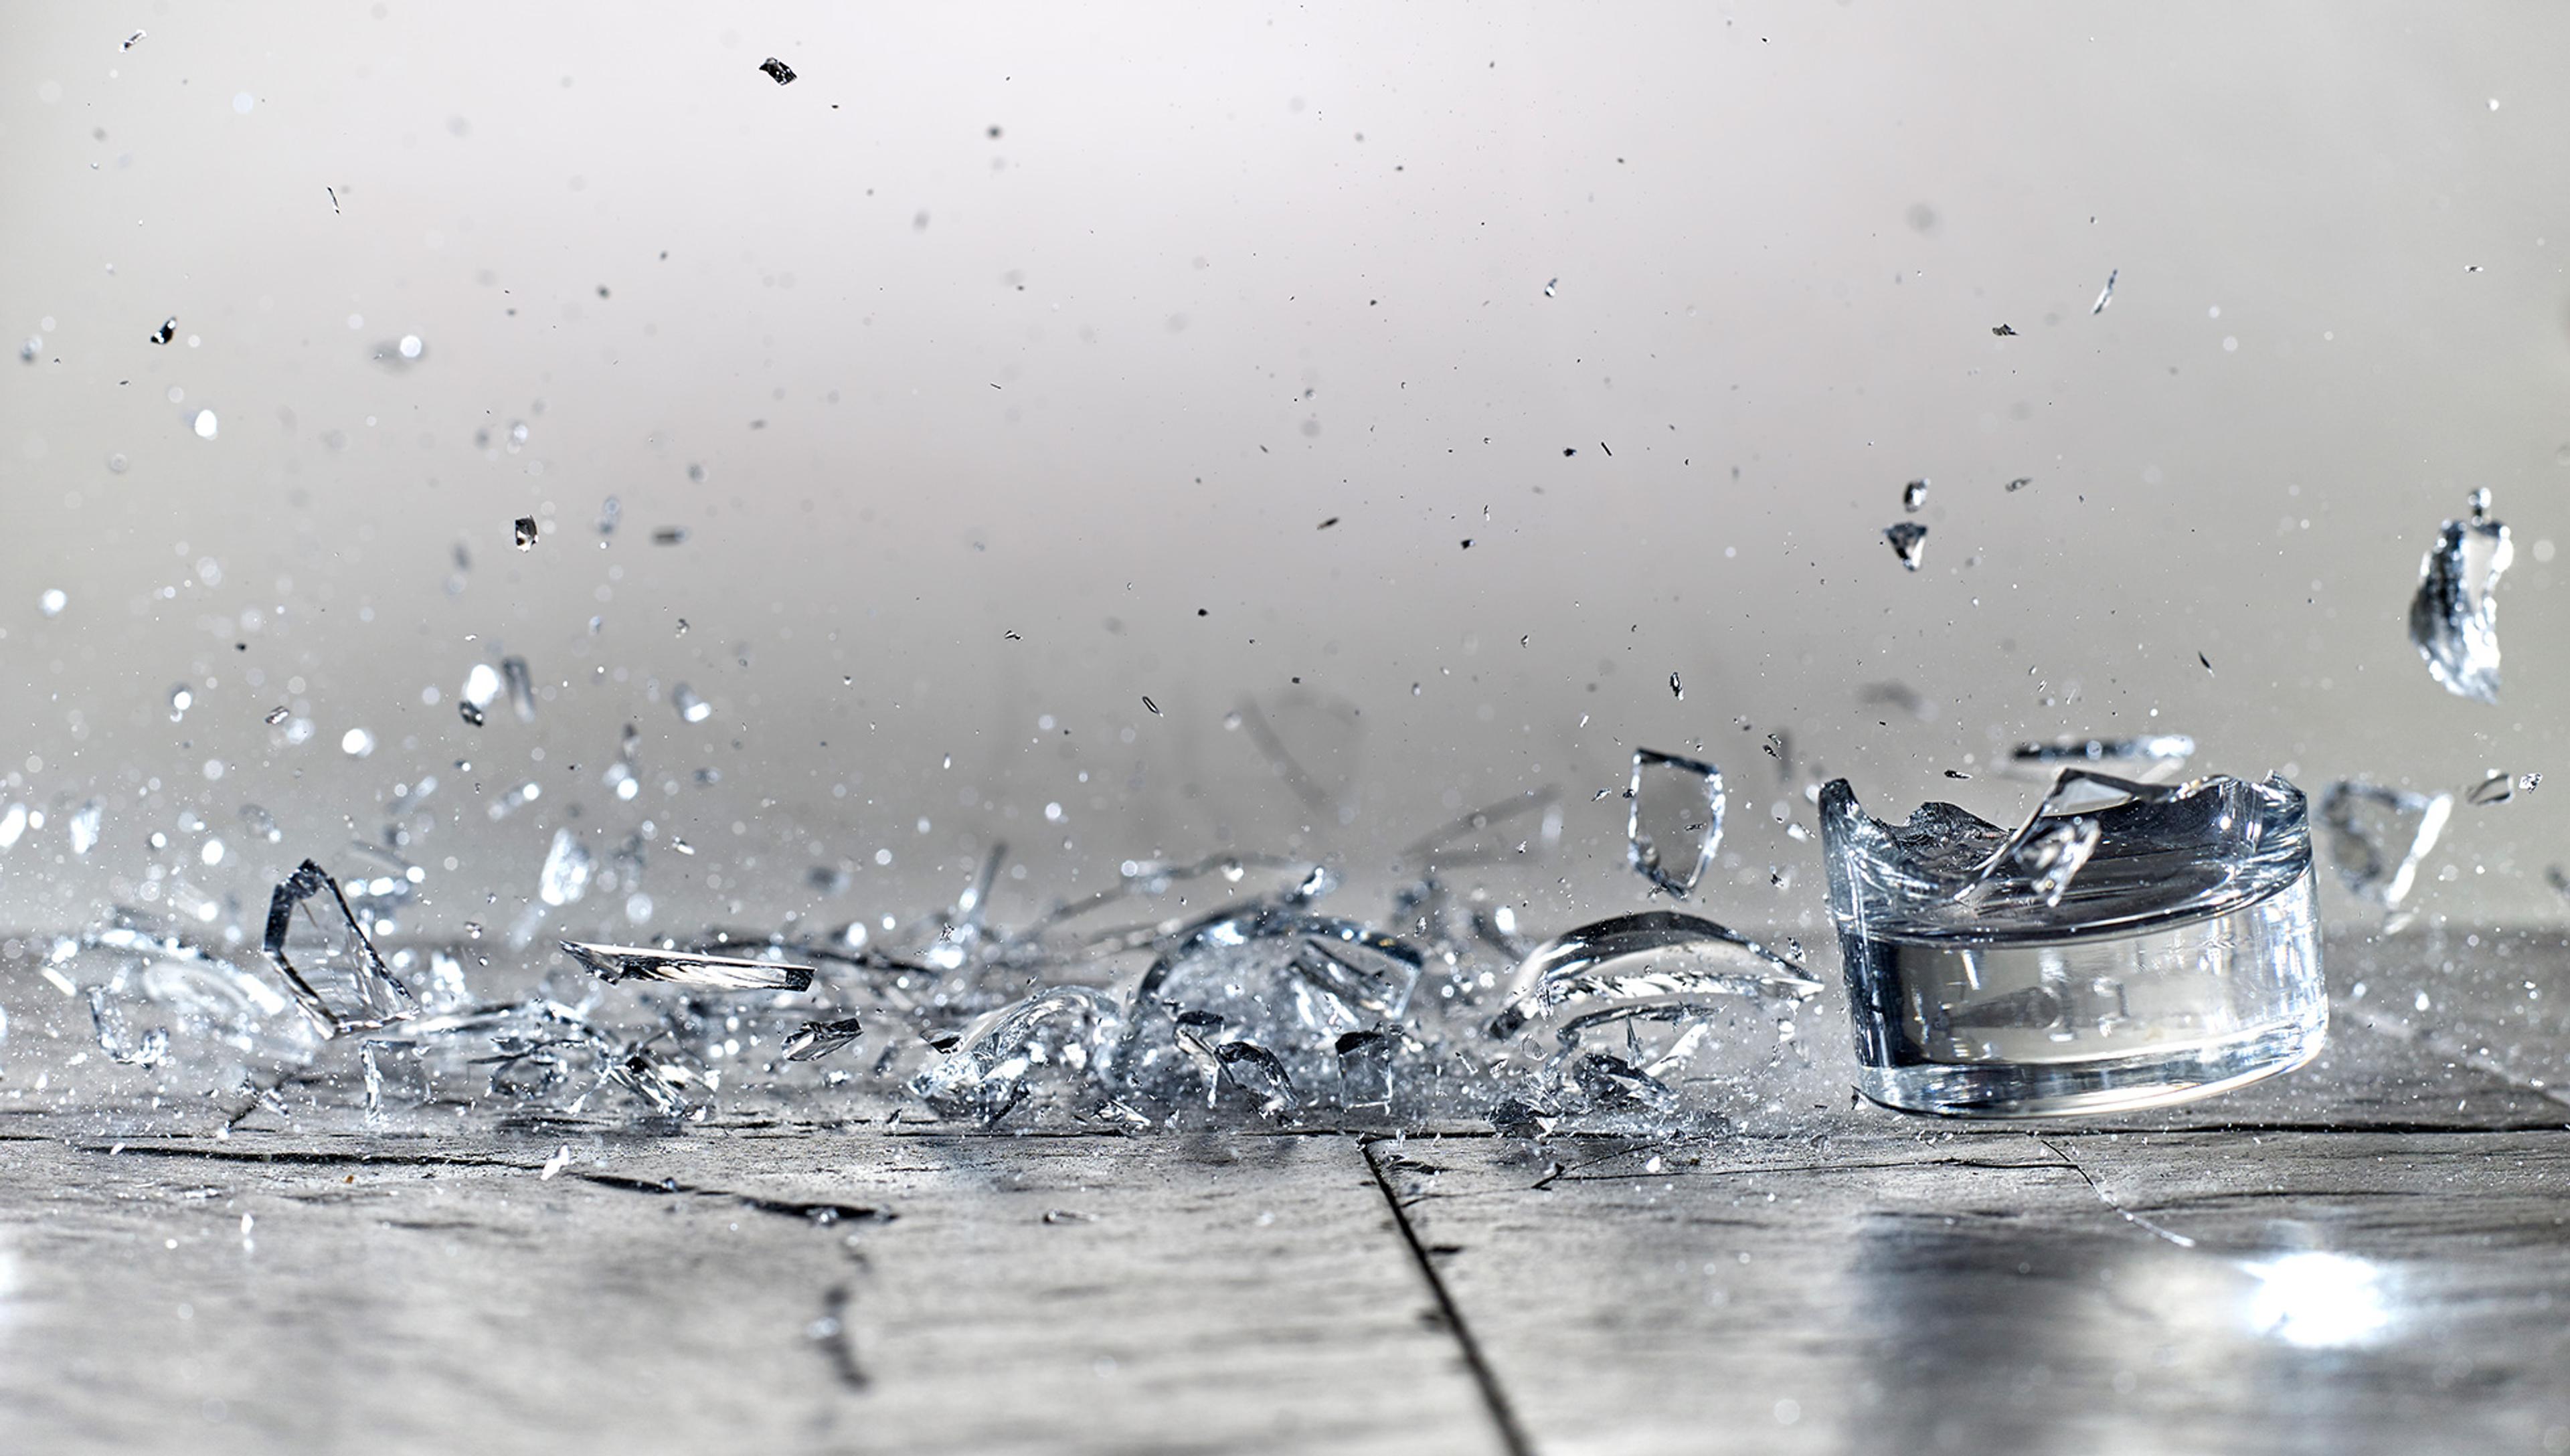 Shattered glass fragments scattered on a grey surface with a blurred background. Some pieces are mid-air, capturing the moment of a glass object crashing and breaking. The image portrays motion and impact.